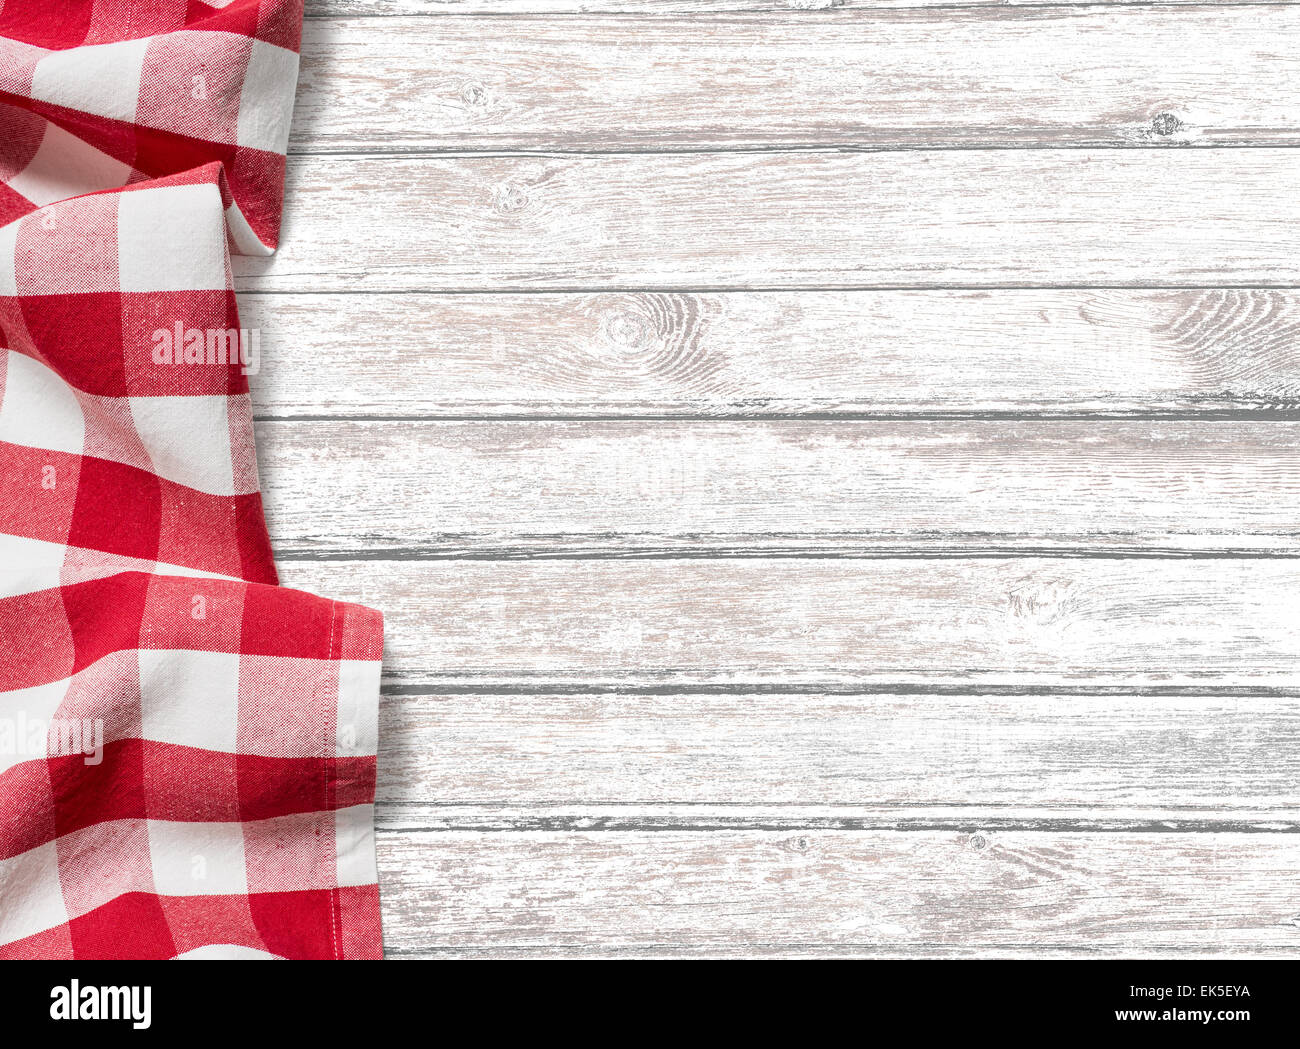 kitchen table background with red picnic cloth Stock Photo